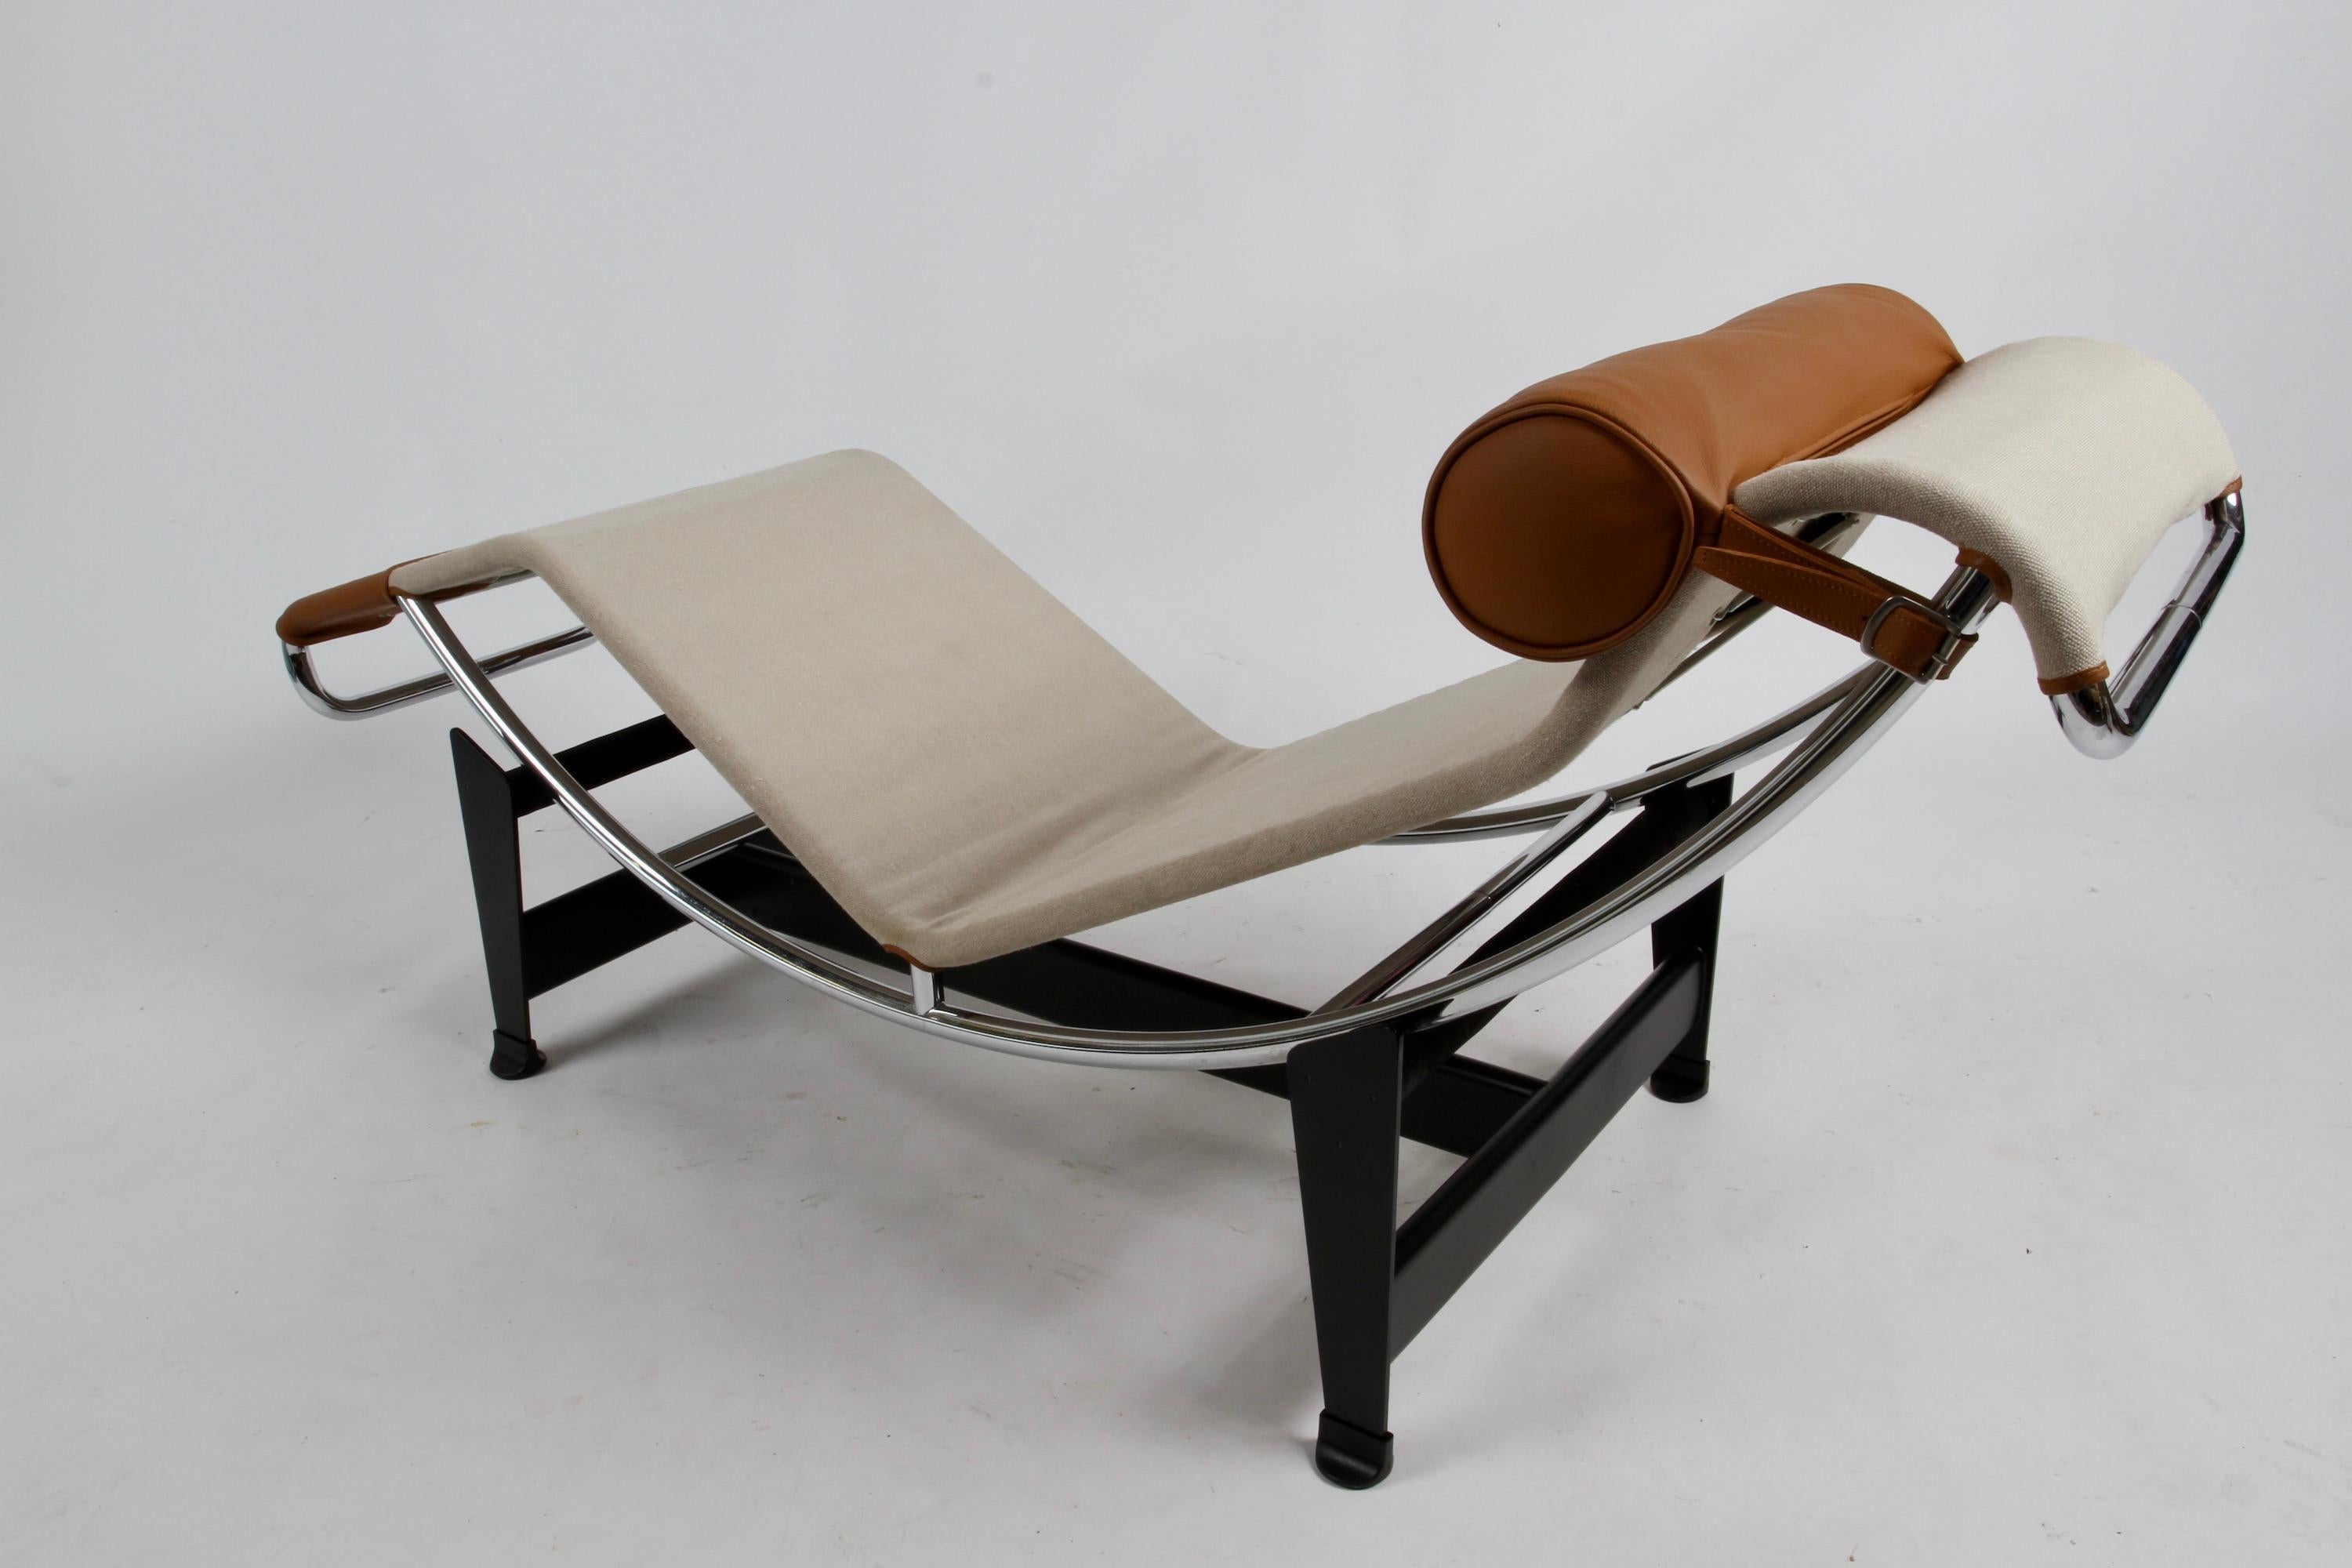 Lc4 Chaise Lounge Canvas & Leather, Charlotte Perriand & Le Corbusier, Cassina 6